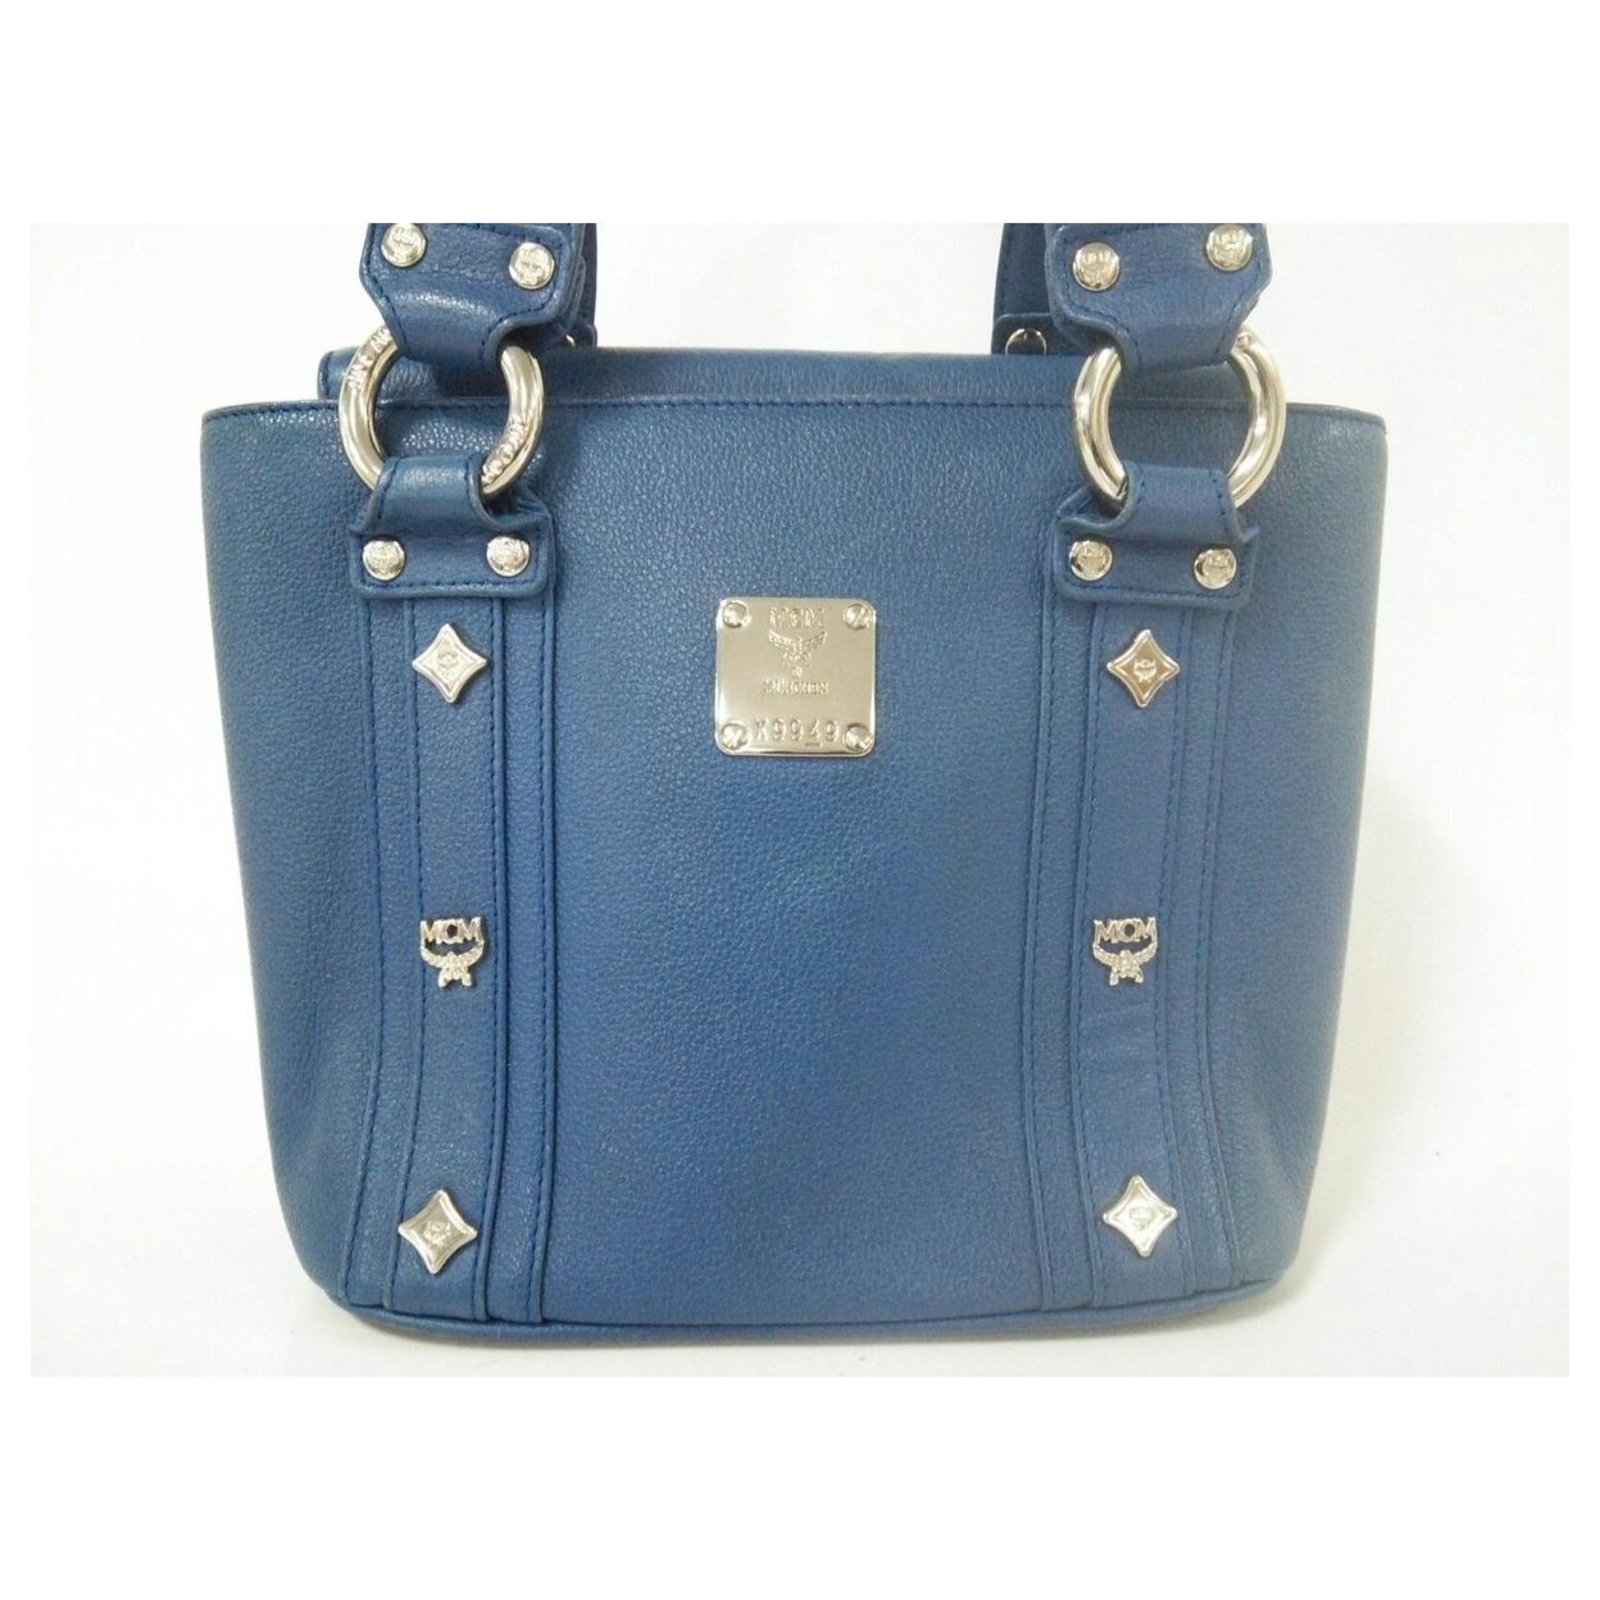 Mcm Blue Small Leather Tote Bag